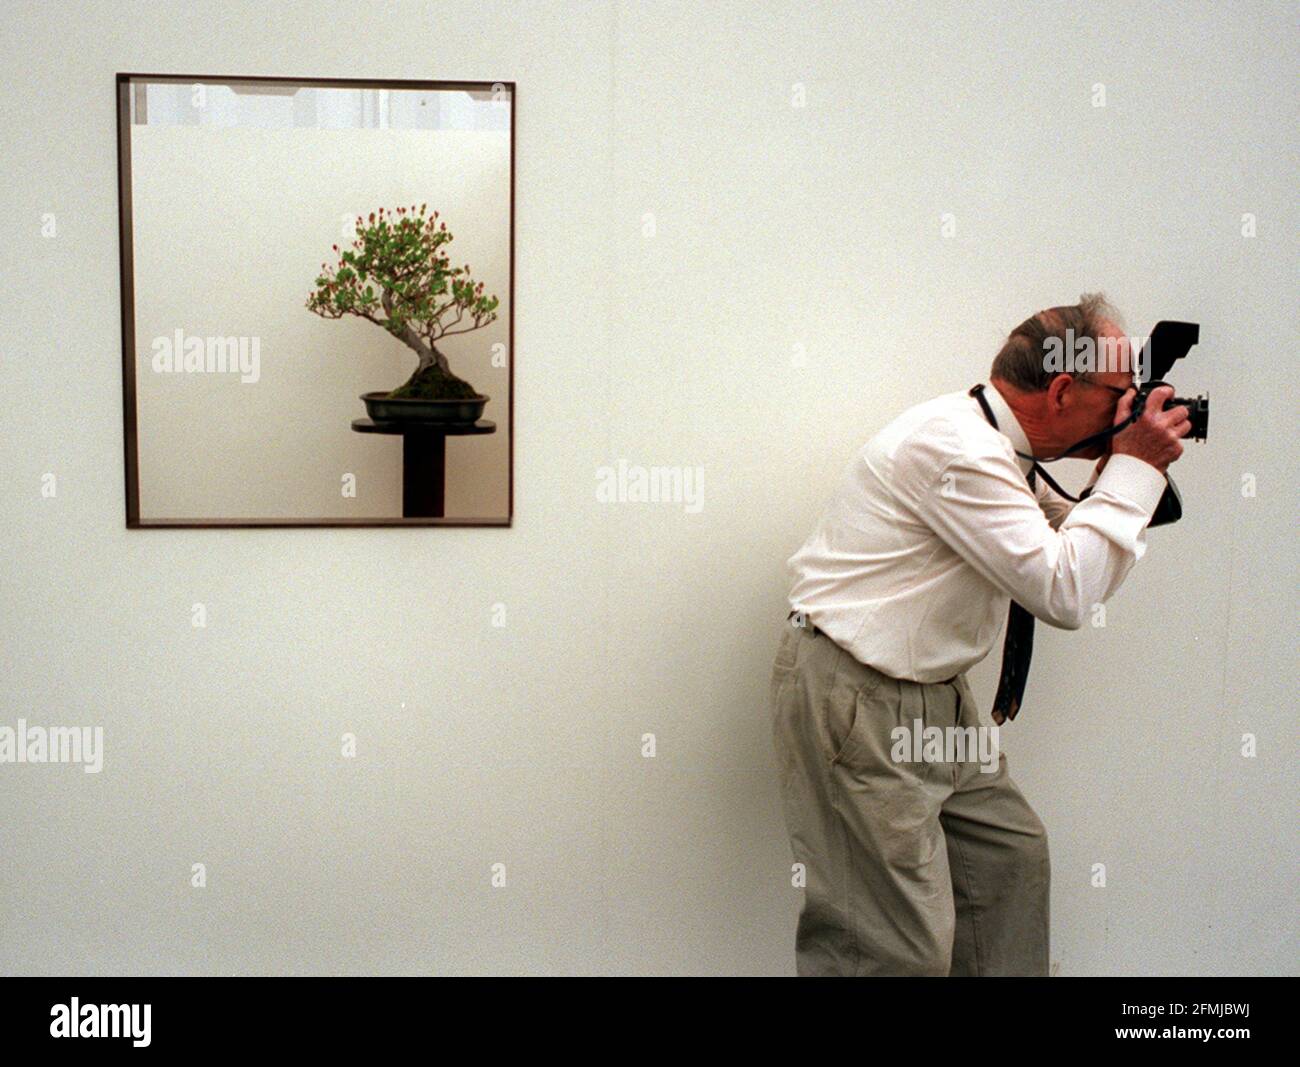 PRESS DAY AT THE CHELSEA FLOWER SHOW MAY 2000 ONE OF THE EXHIBITORS PHOTOGRAPHING HIS STAND, NEXT TO  A STAND DISPLAYING 'PENJING', FROM CHINA, WHICH ARE THE ORIGIANL TREES THAT BONSAI STARTED FROM Stock Photo